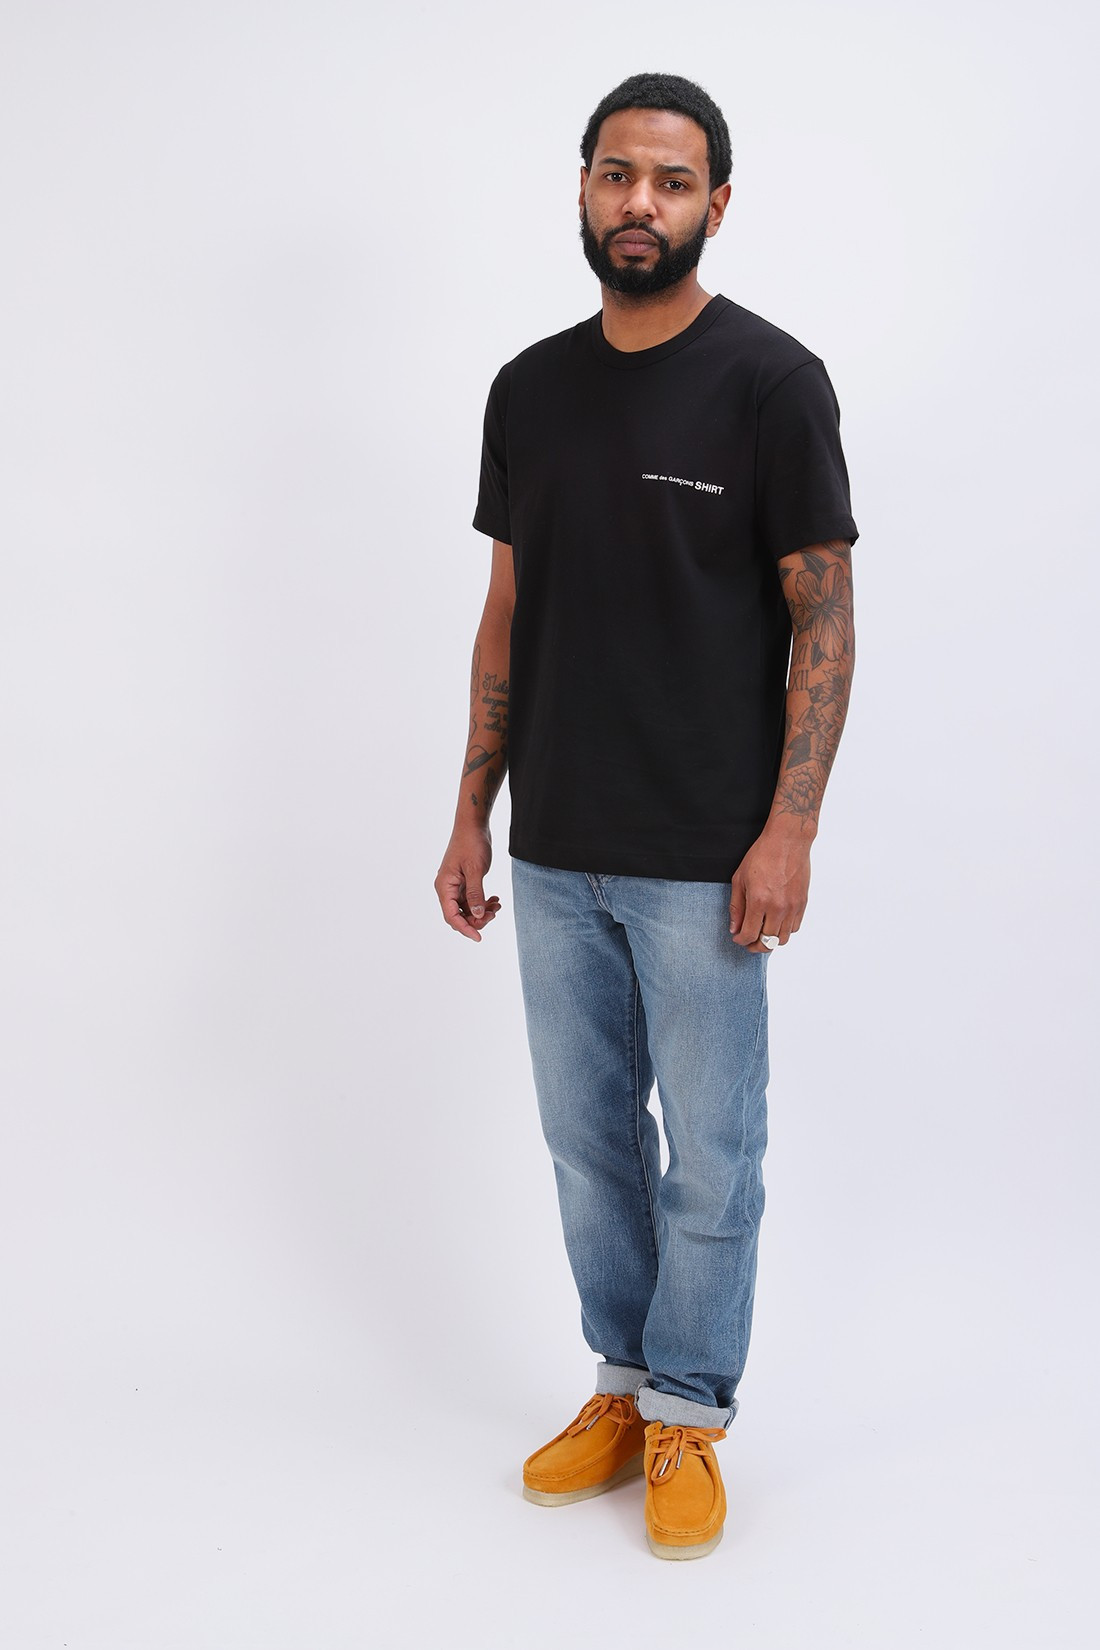 LEVI'S ® MADE AND CRAFTED / Lmc 502 Lmc leward